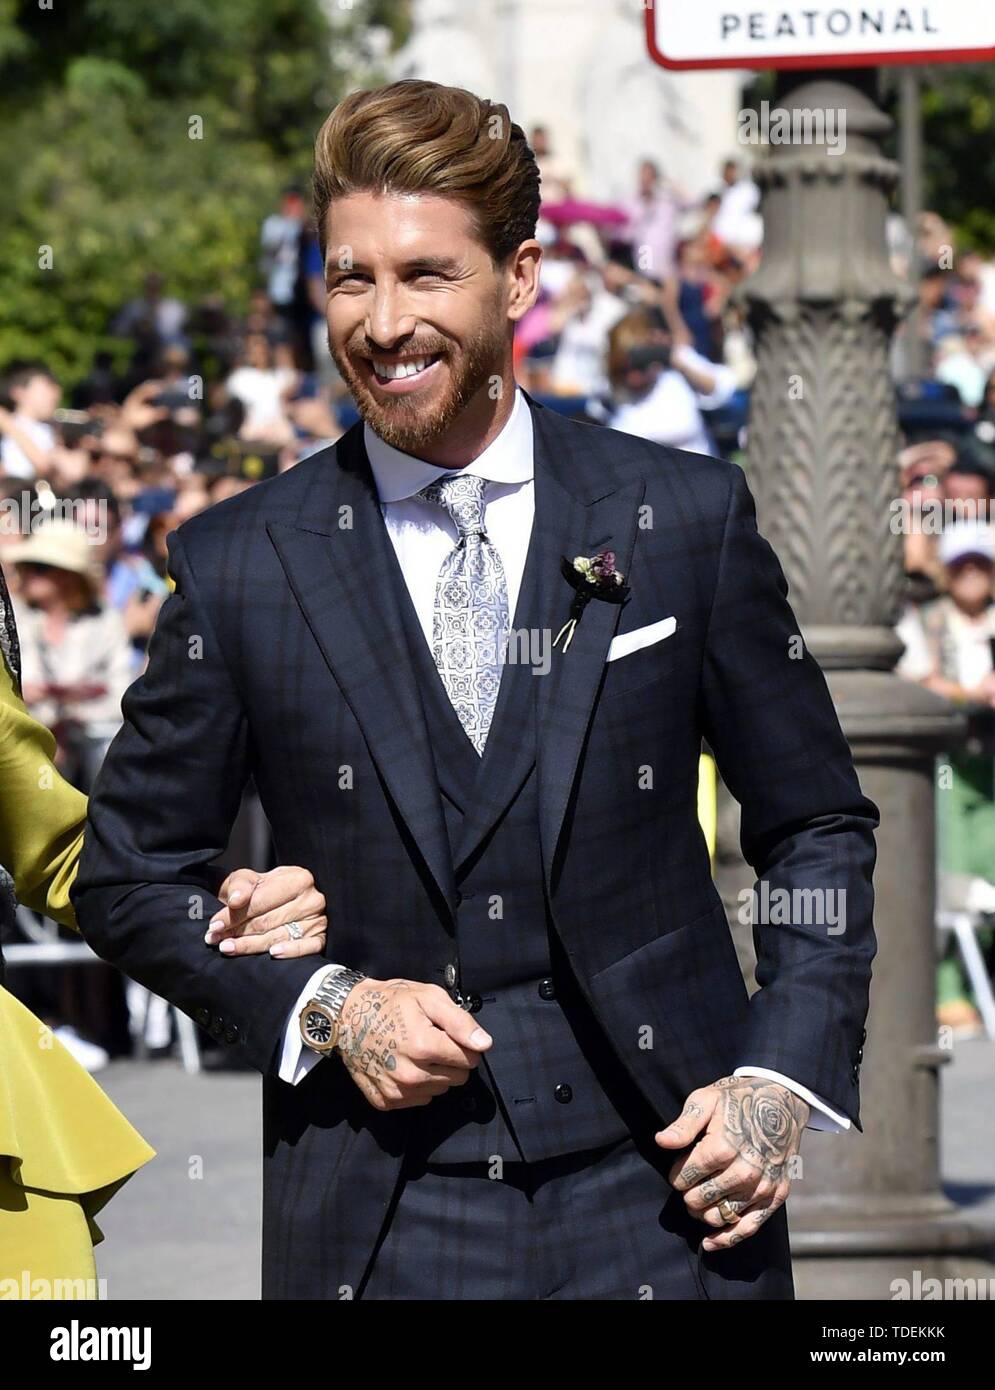 Seville, Spain. 15th June, 2019. Seville, Spain. 15th June, 2019. Soccerplayer Sergio Ramos and mother Paqui Garcia during his wedding with Pilar Rubio in Seville on Saturday, 15 June 2019. Credit: CORDON PRESS/Alamy Live News Credit: CORDON PRESS/Alamy Live News Stock Photo